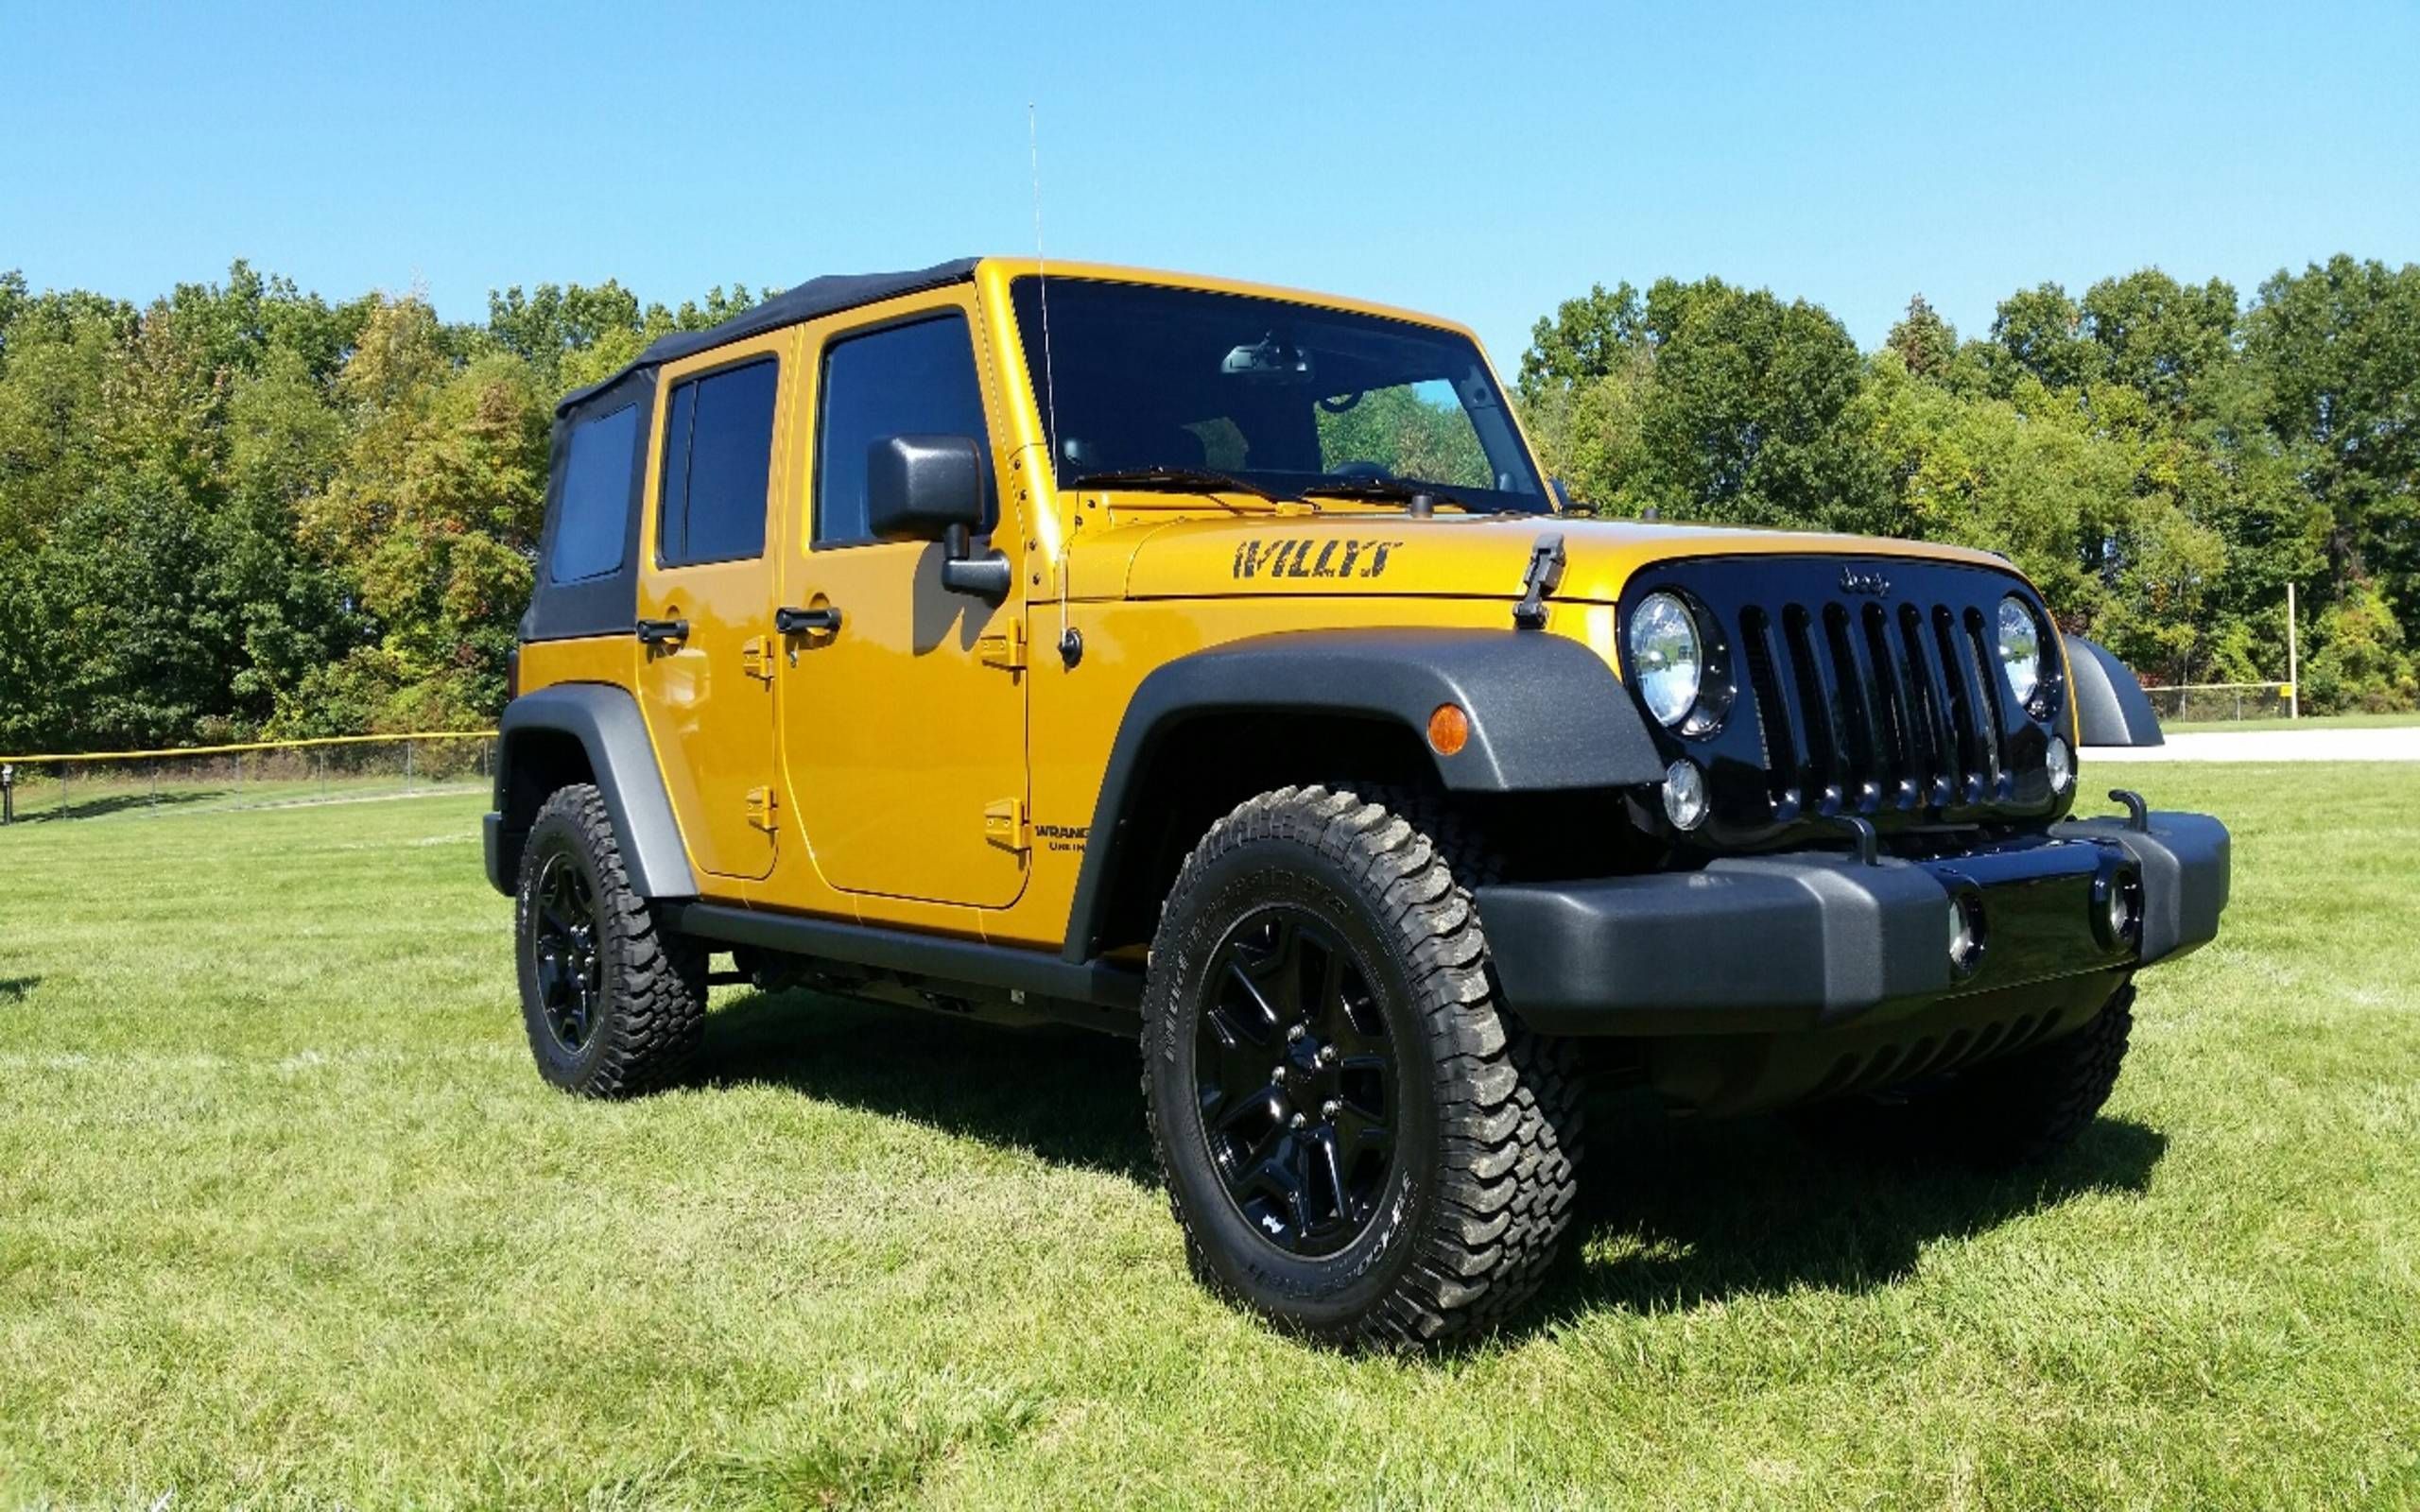 All that unibody Jeep Wrangler hype? Yeah, not so much...